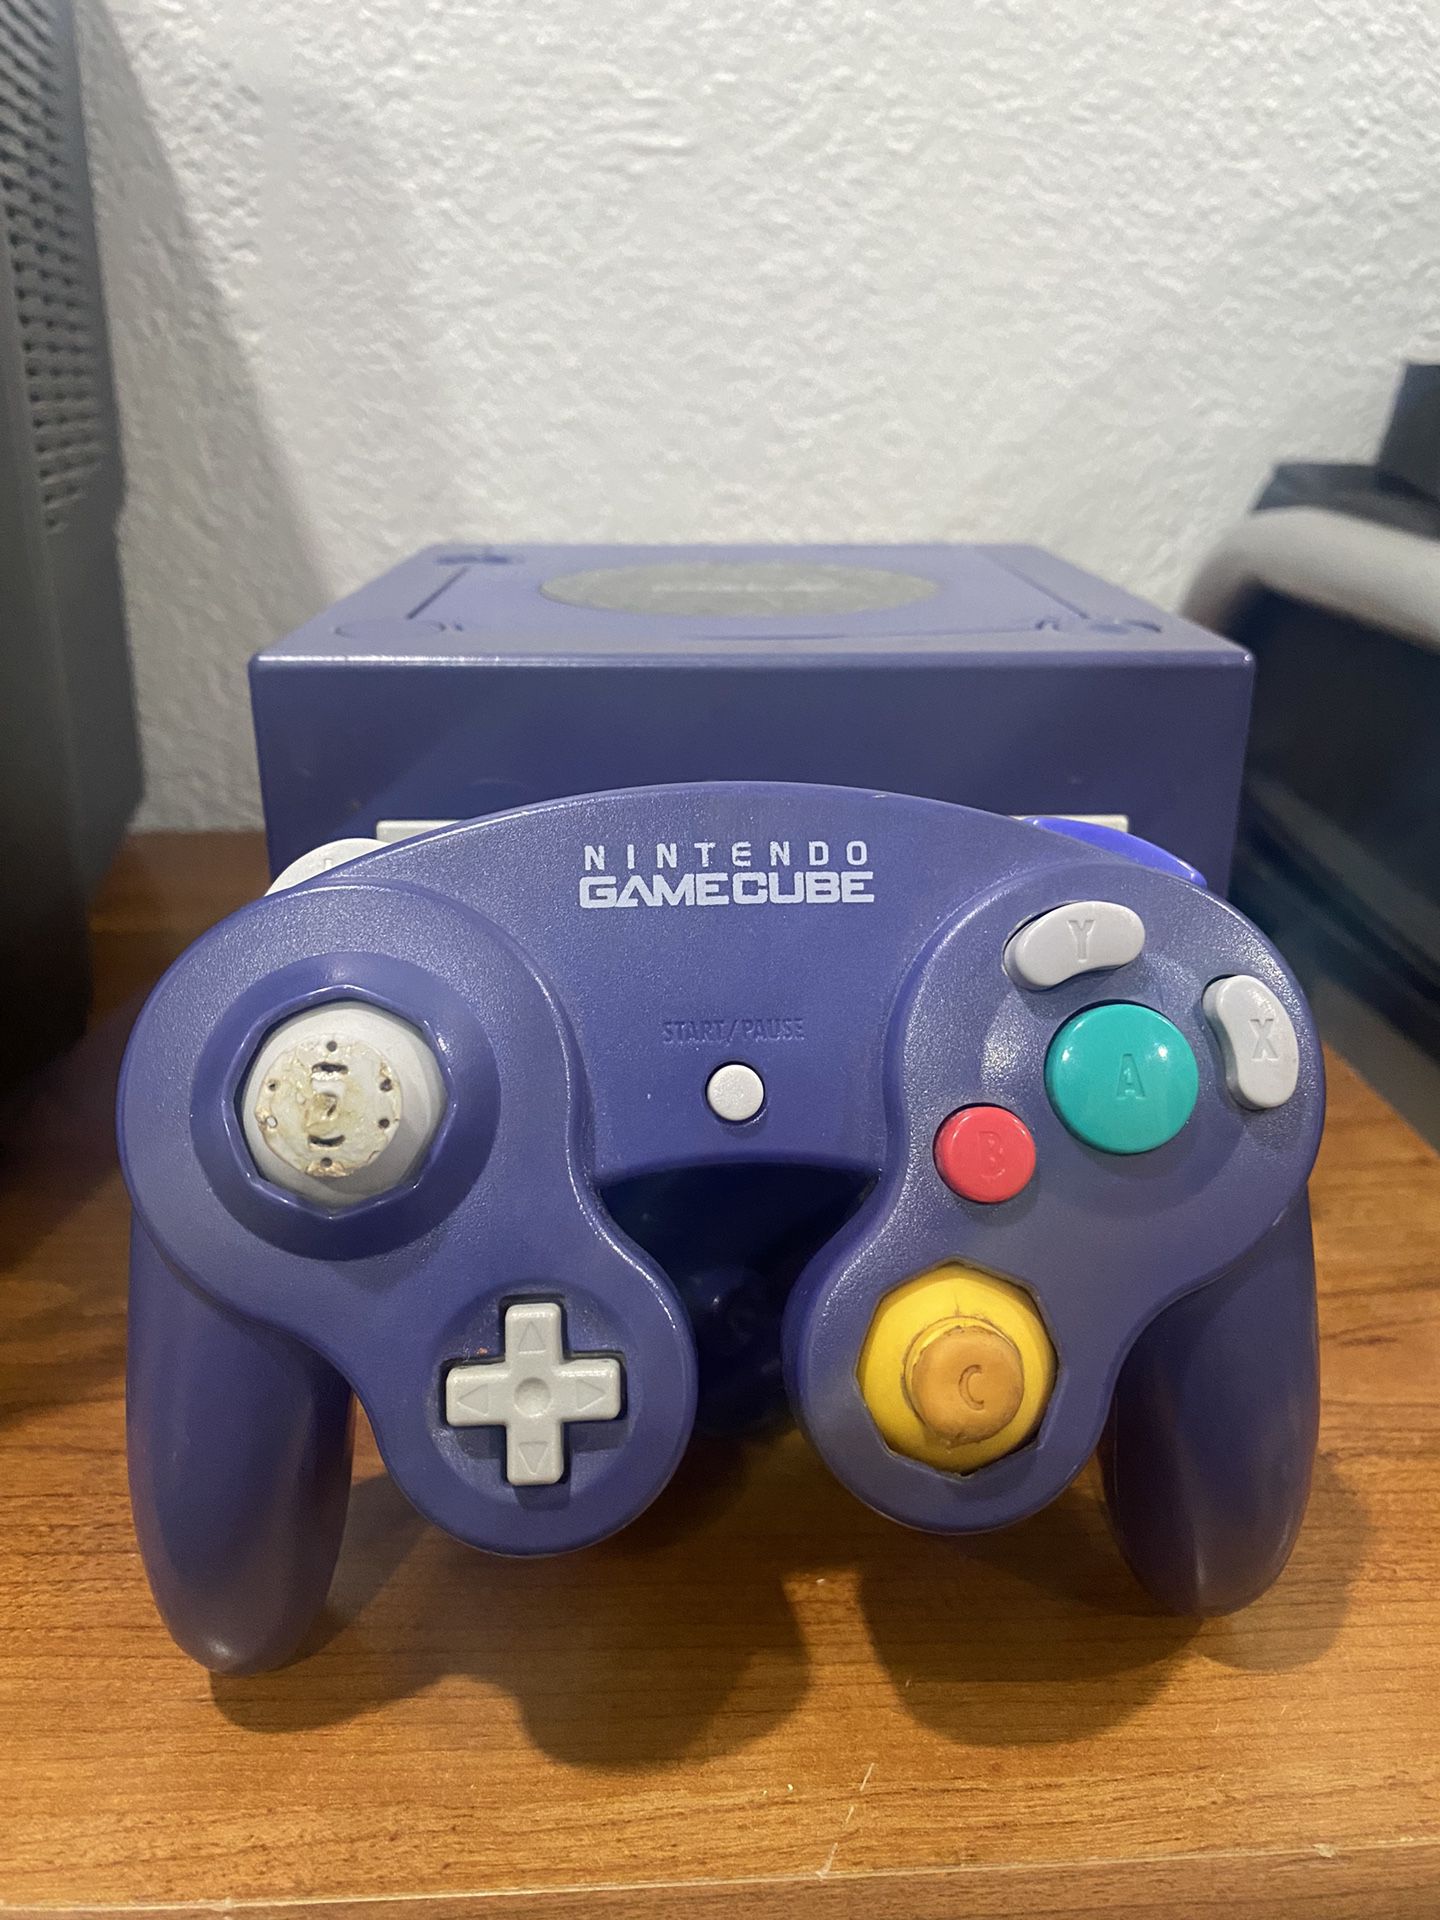 Nintendo Gamecube Indigo Purple Console Comes With Controller As Well In Good Condition Can Meet Up Public 